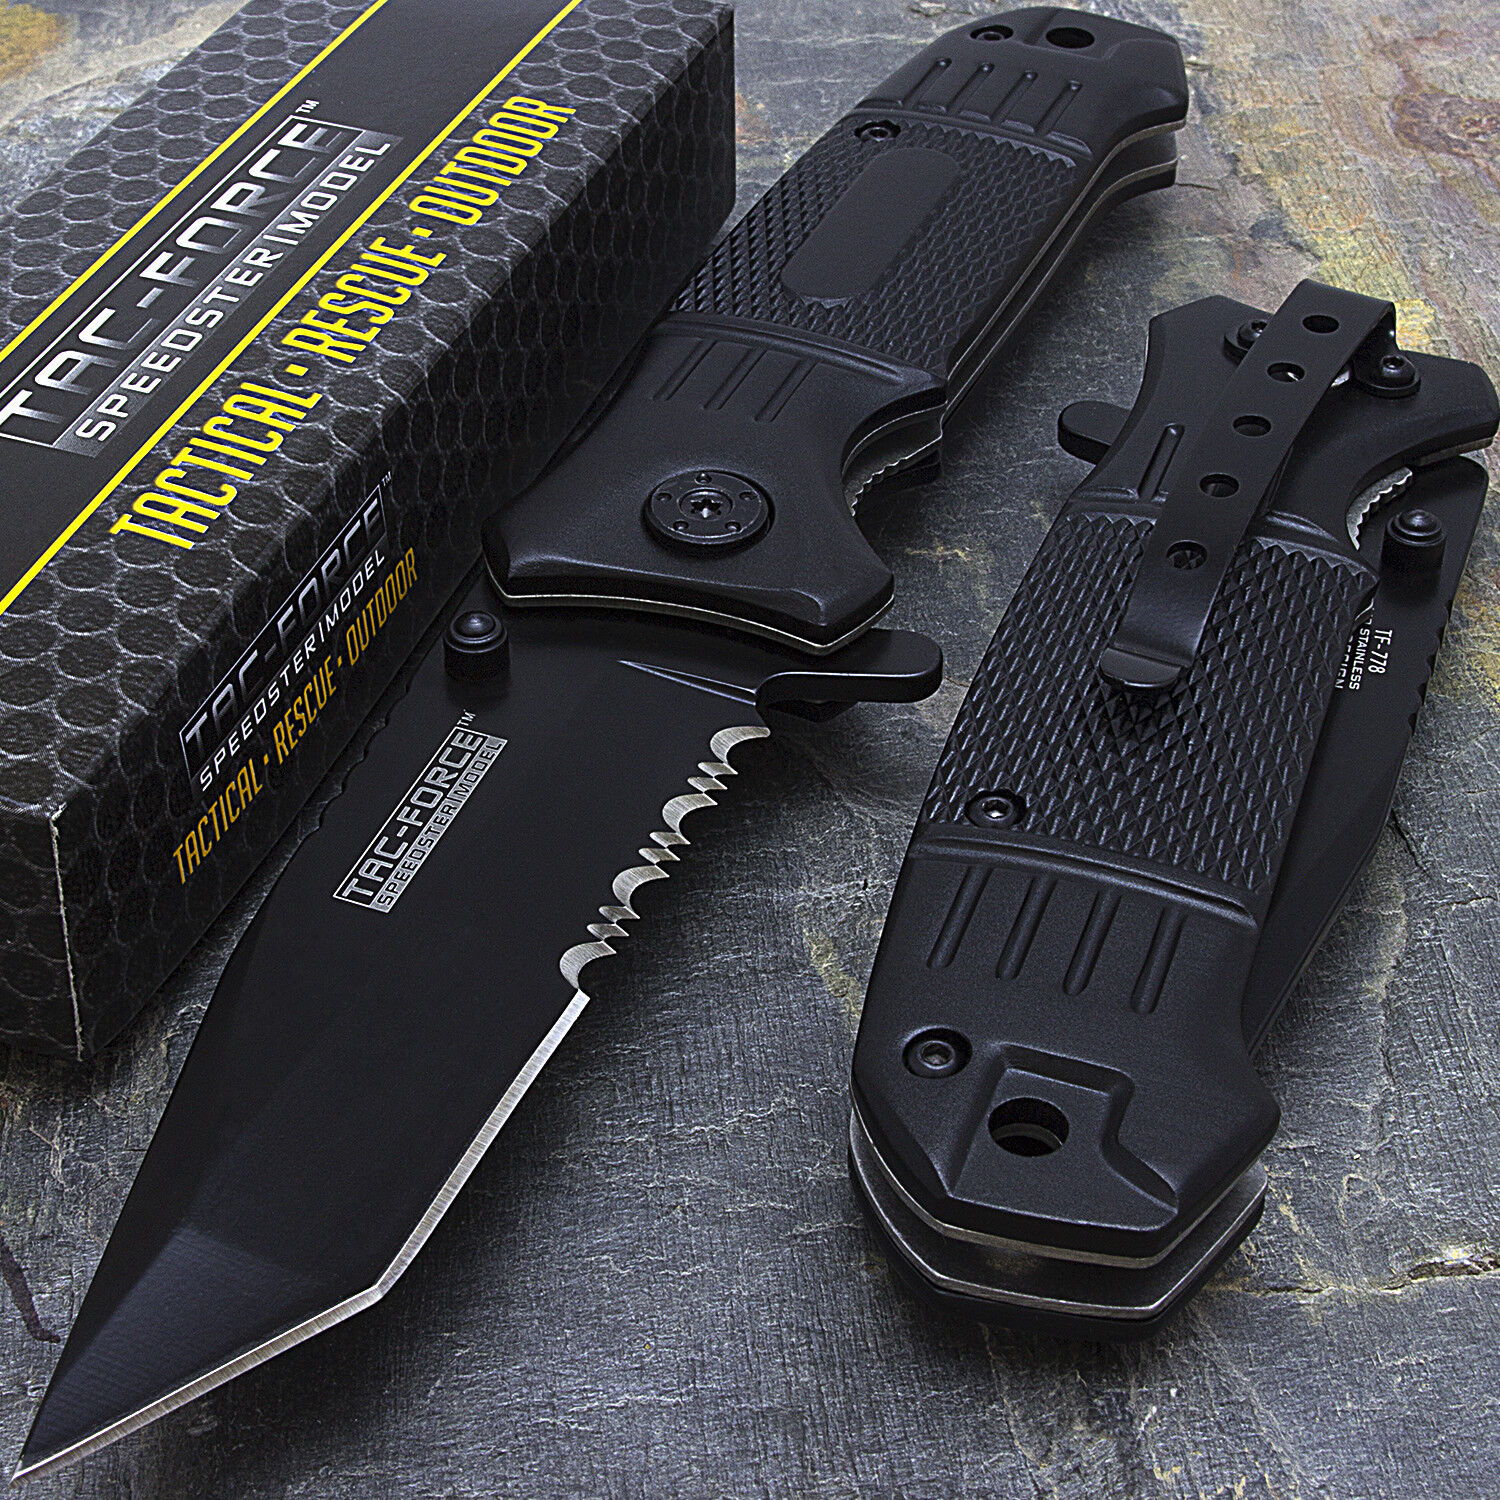 7.75" TAC FORCE HALF SERRATED TANTO ASSISTED OPEN TACTICAL FOLDING KNIFE Spring Tac-Force TF-778T